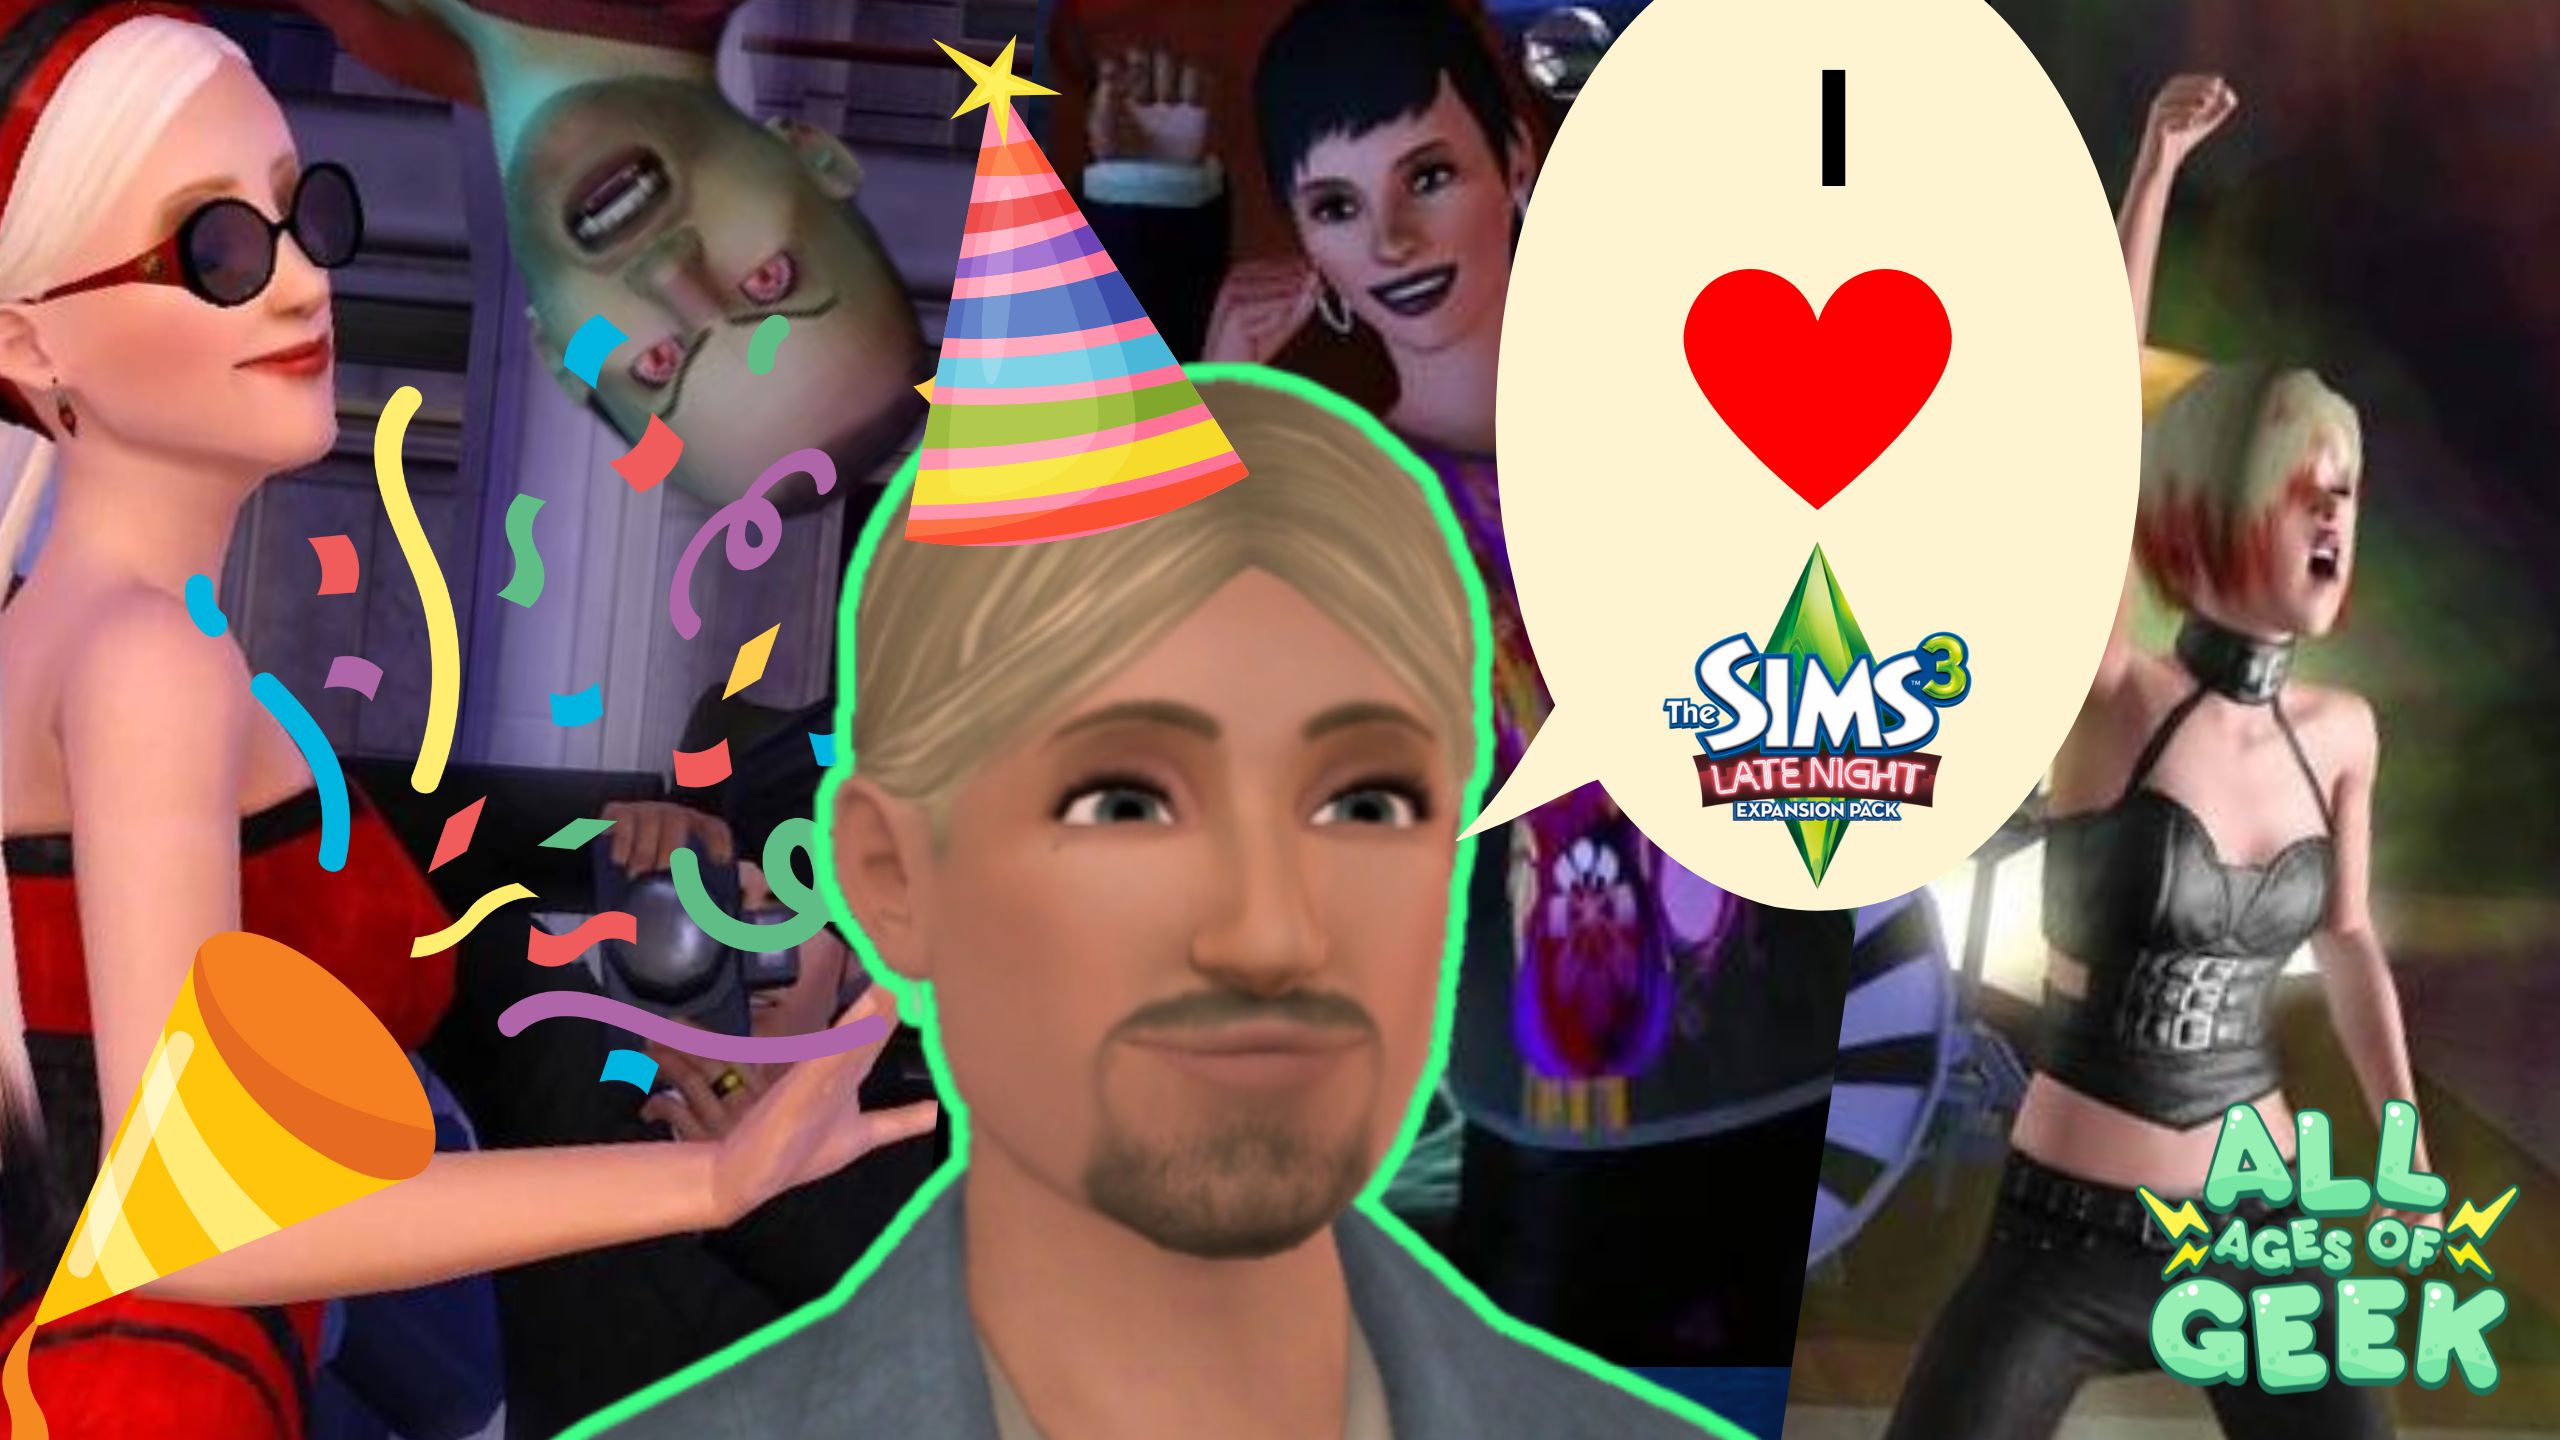 Image of Sims characters enjoying a party in The Sims 3: Late Night expansion. One Sim wears a party hat and sunglasses, while others are dancing and having fun. A speech bubble with 'I ♥ The Sims 3: Late Night' is shown, and the All Ages of Geek logo is in the bottom right corner.